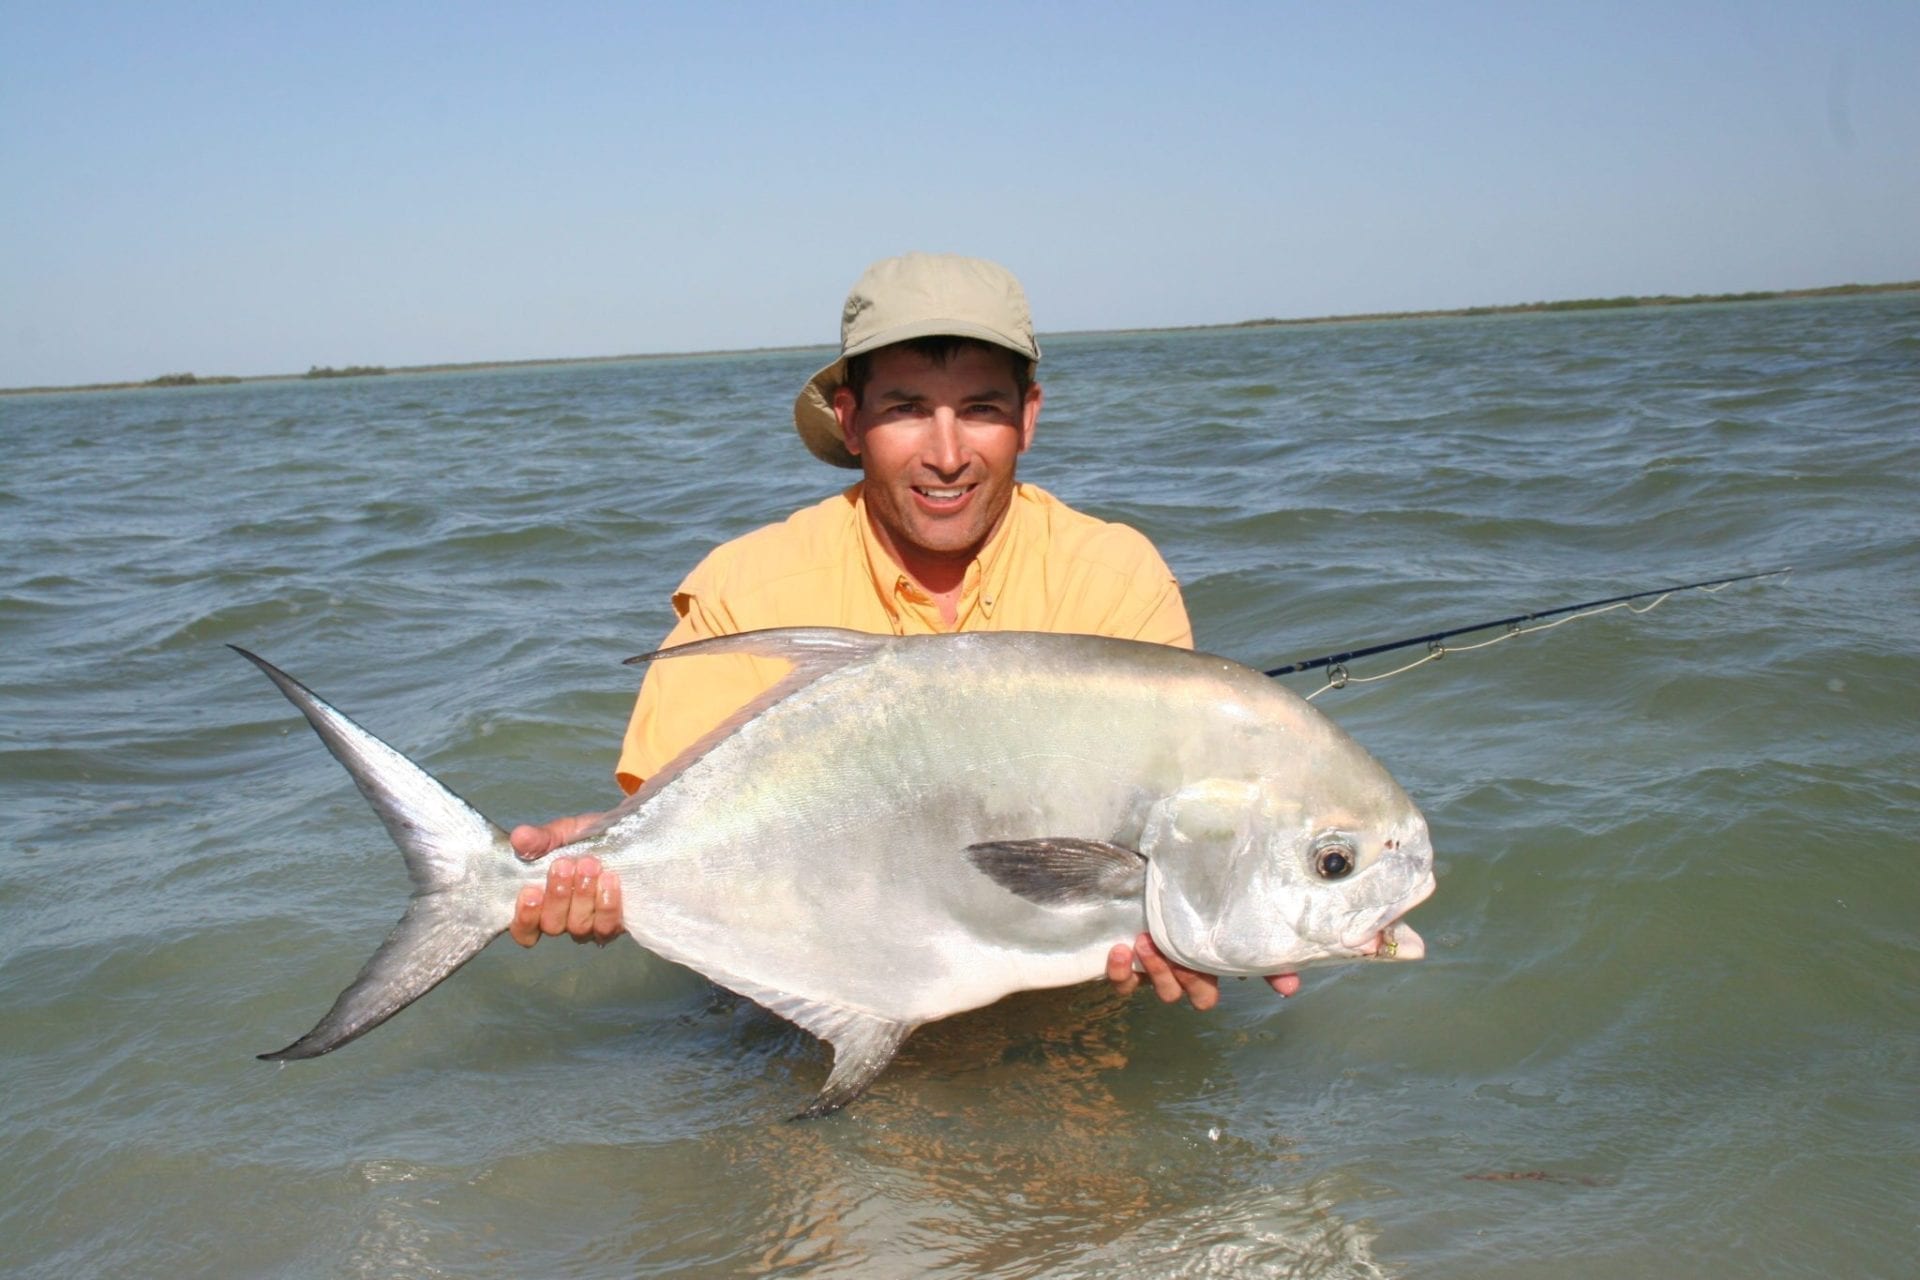 Kent Goodman with a giant permit on the fly